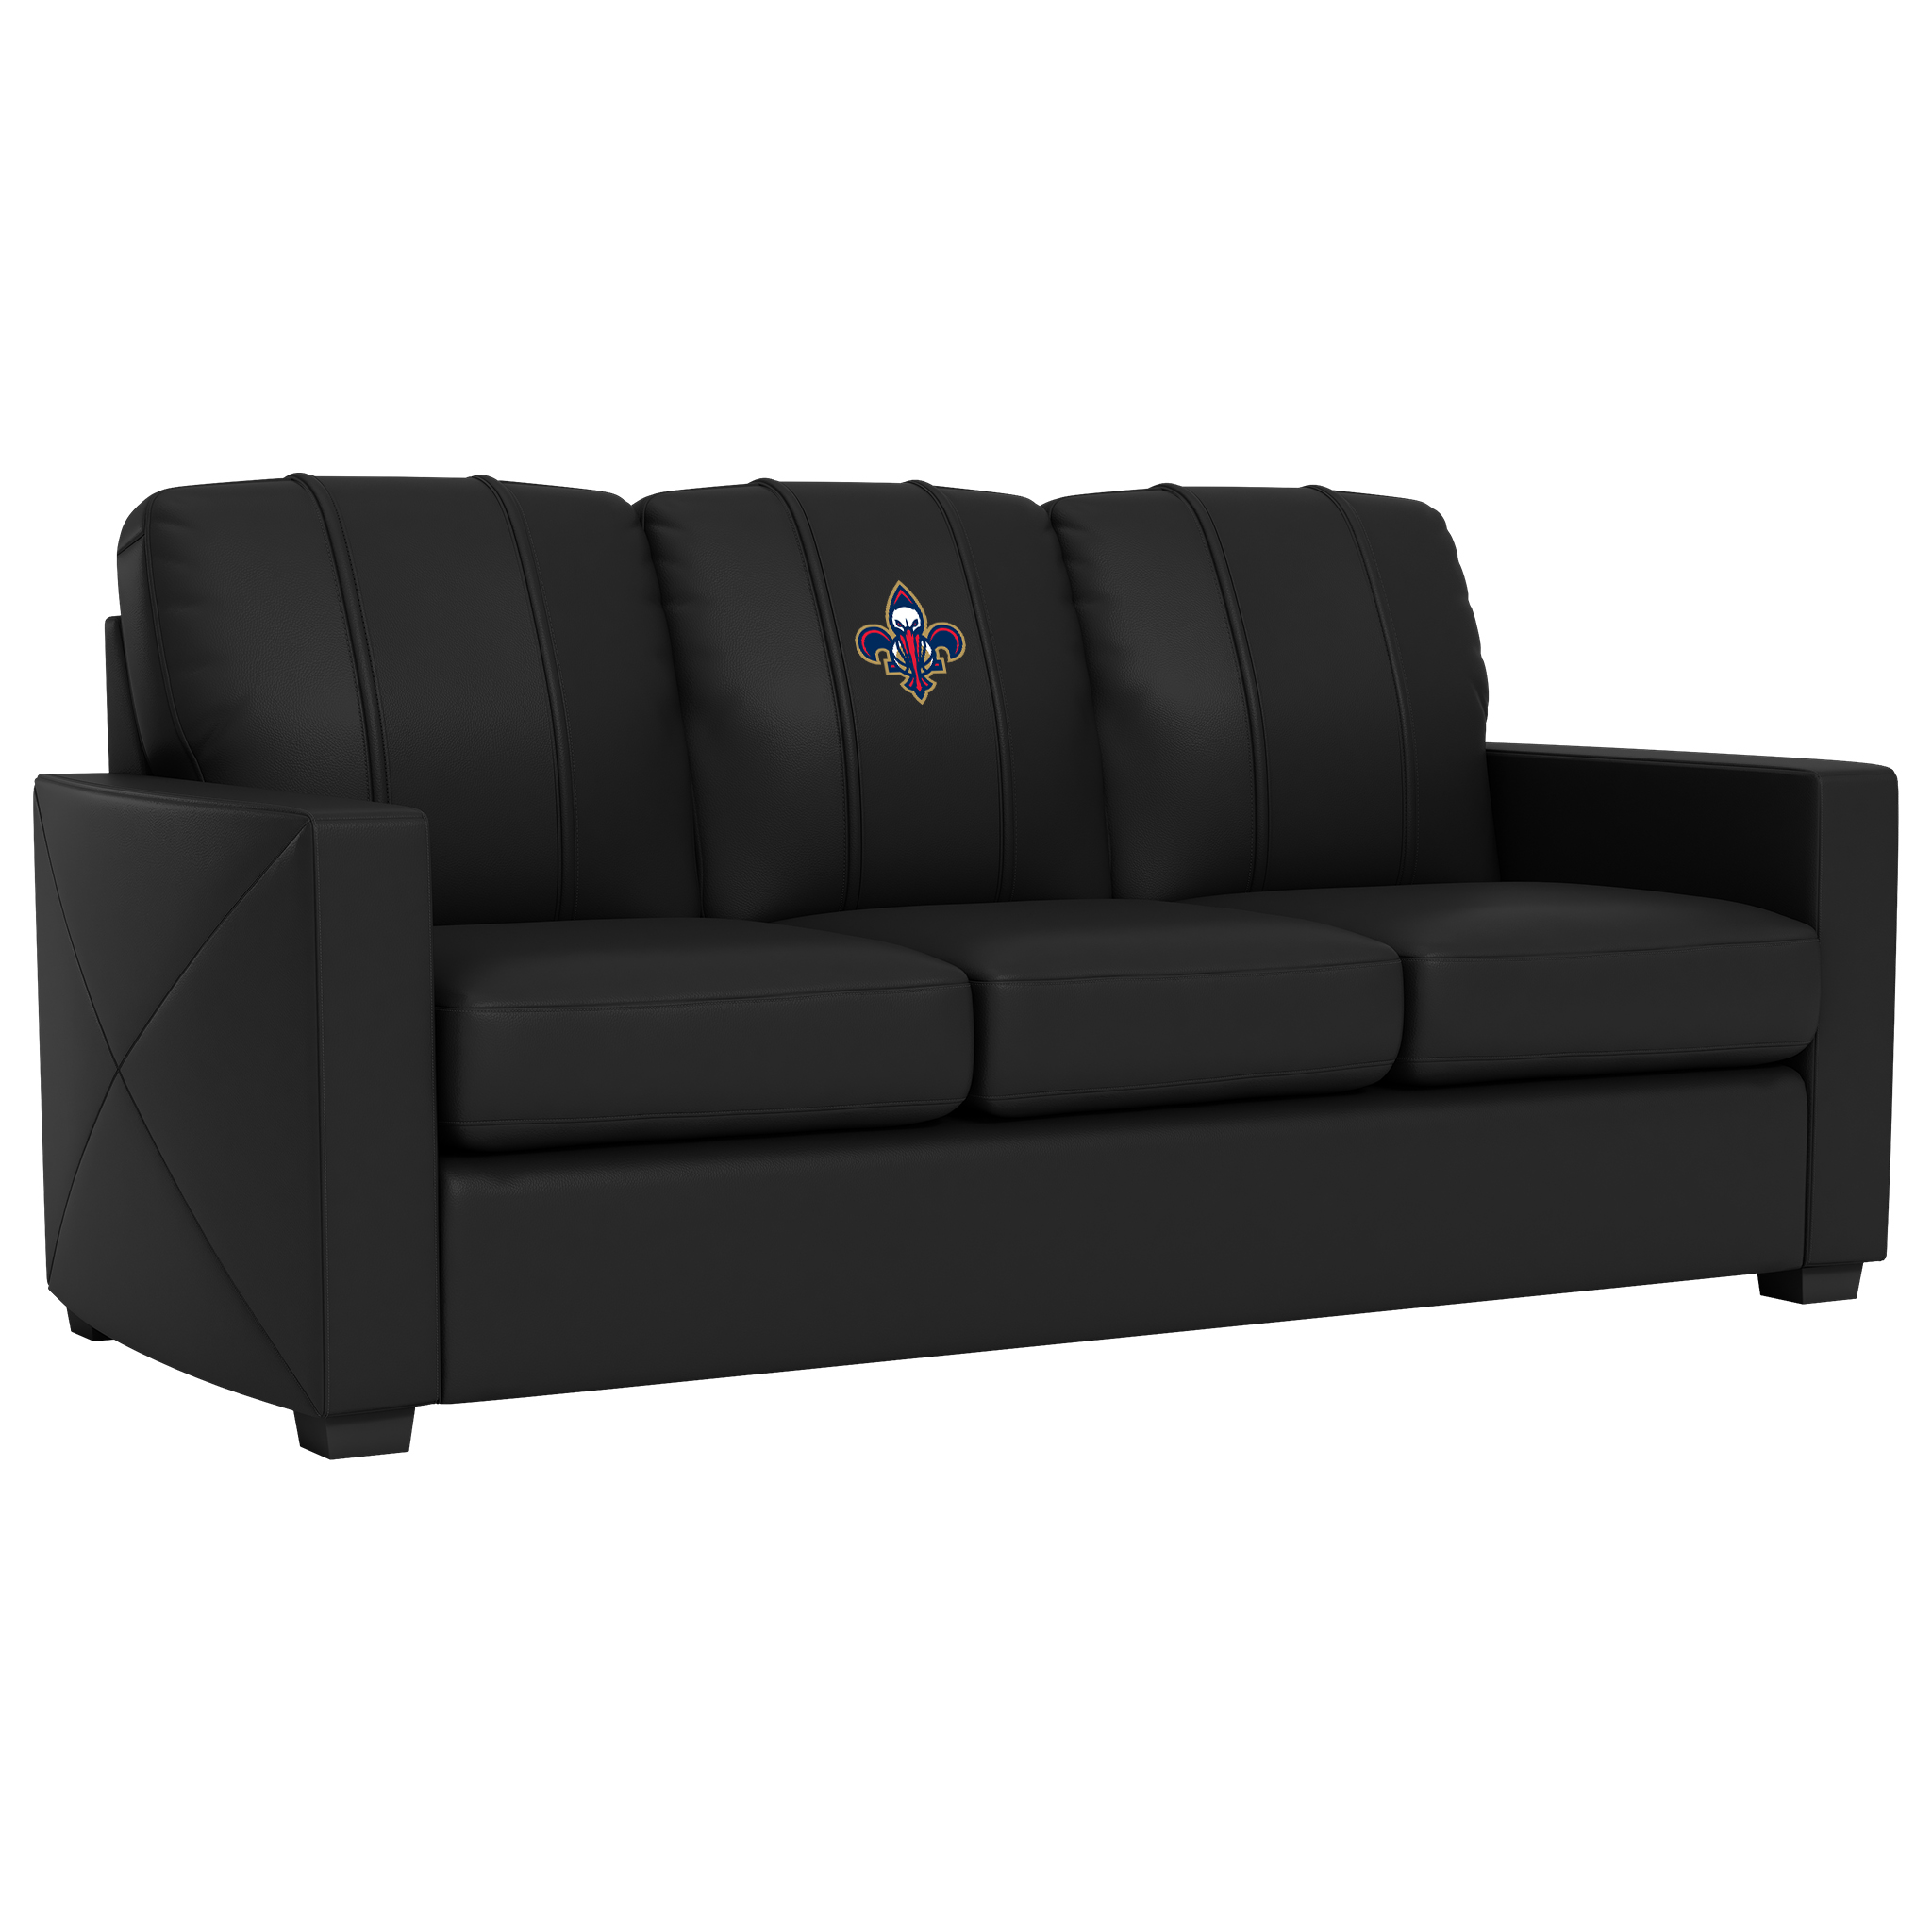 New Orleans Pelicans Silver Sofa with New Orleans Pelicans Secondary